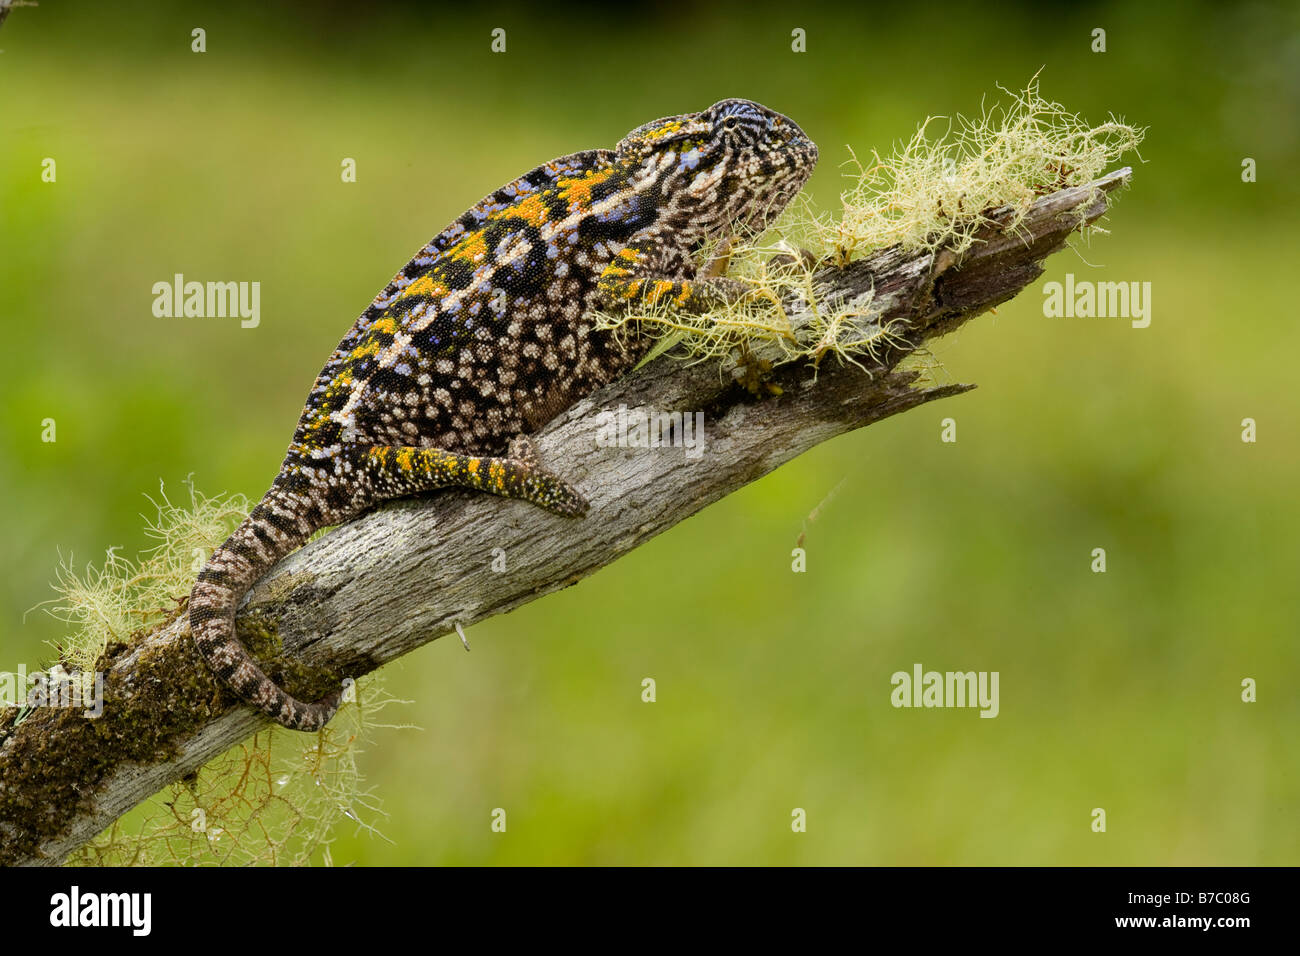 Carpet Chameleon Madagascar. Wild - releases not required Stock Photo